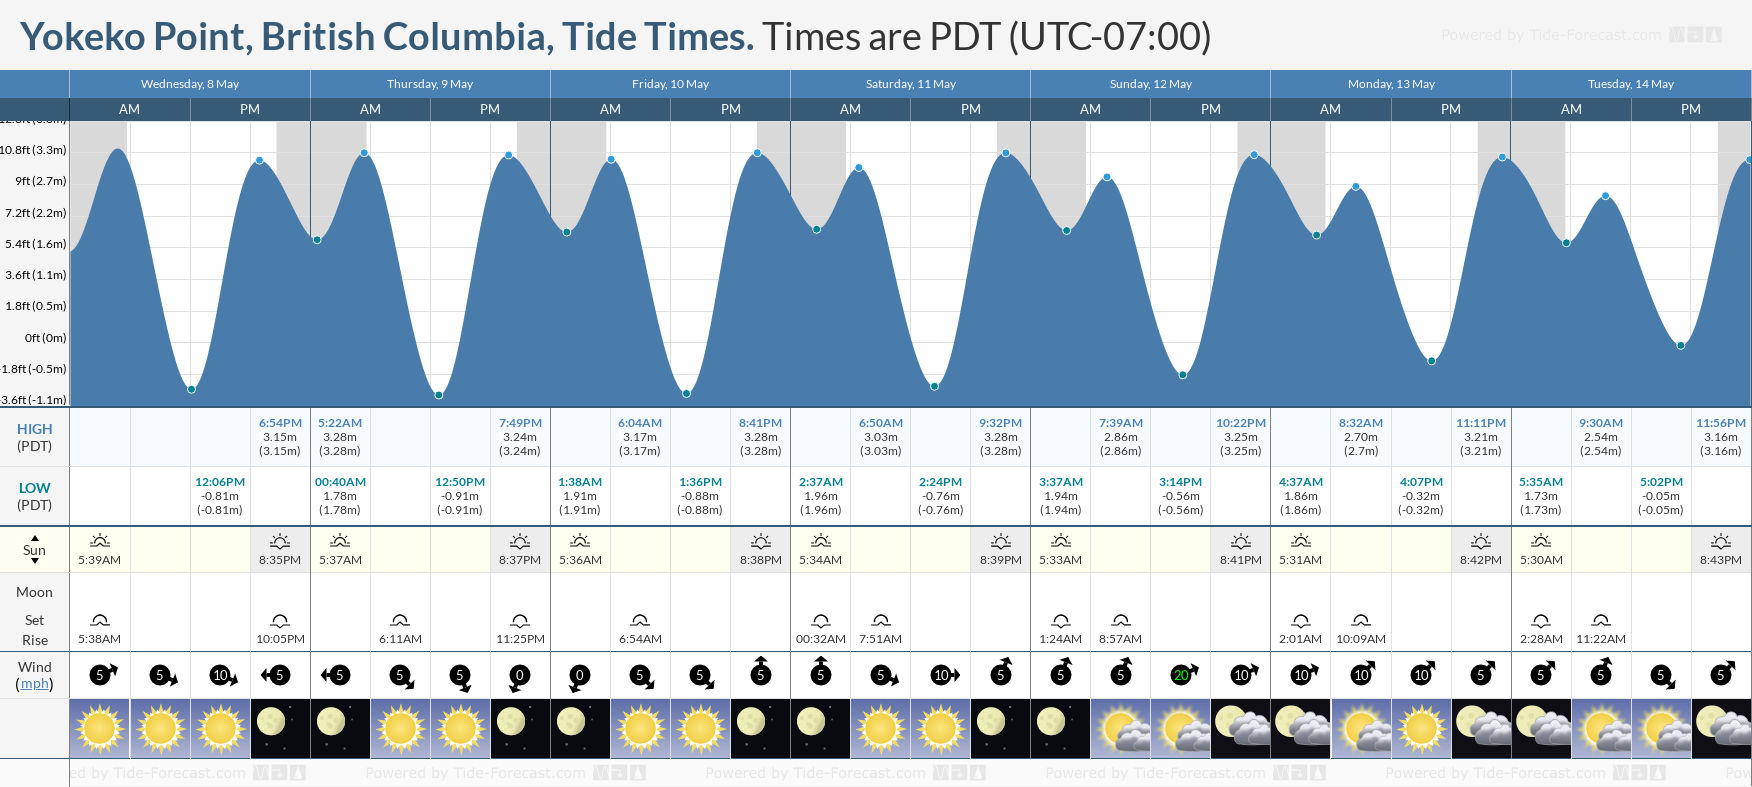 Yokeko Point, British Columbia Tide Chart including high and low tide tide times for the next 7 days